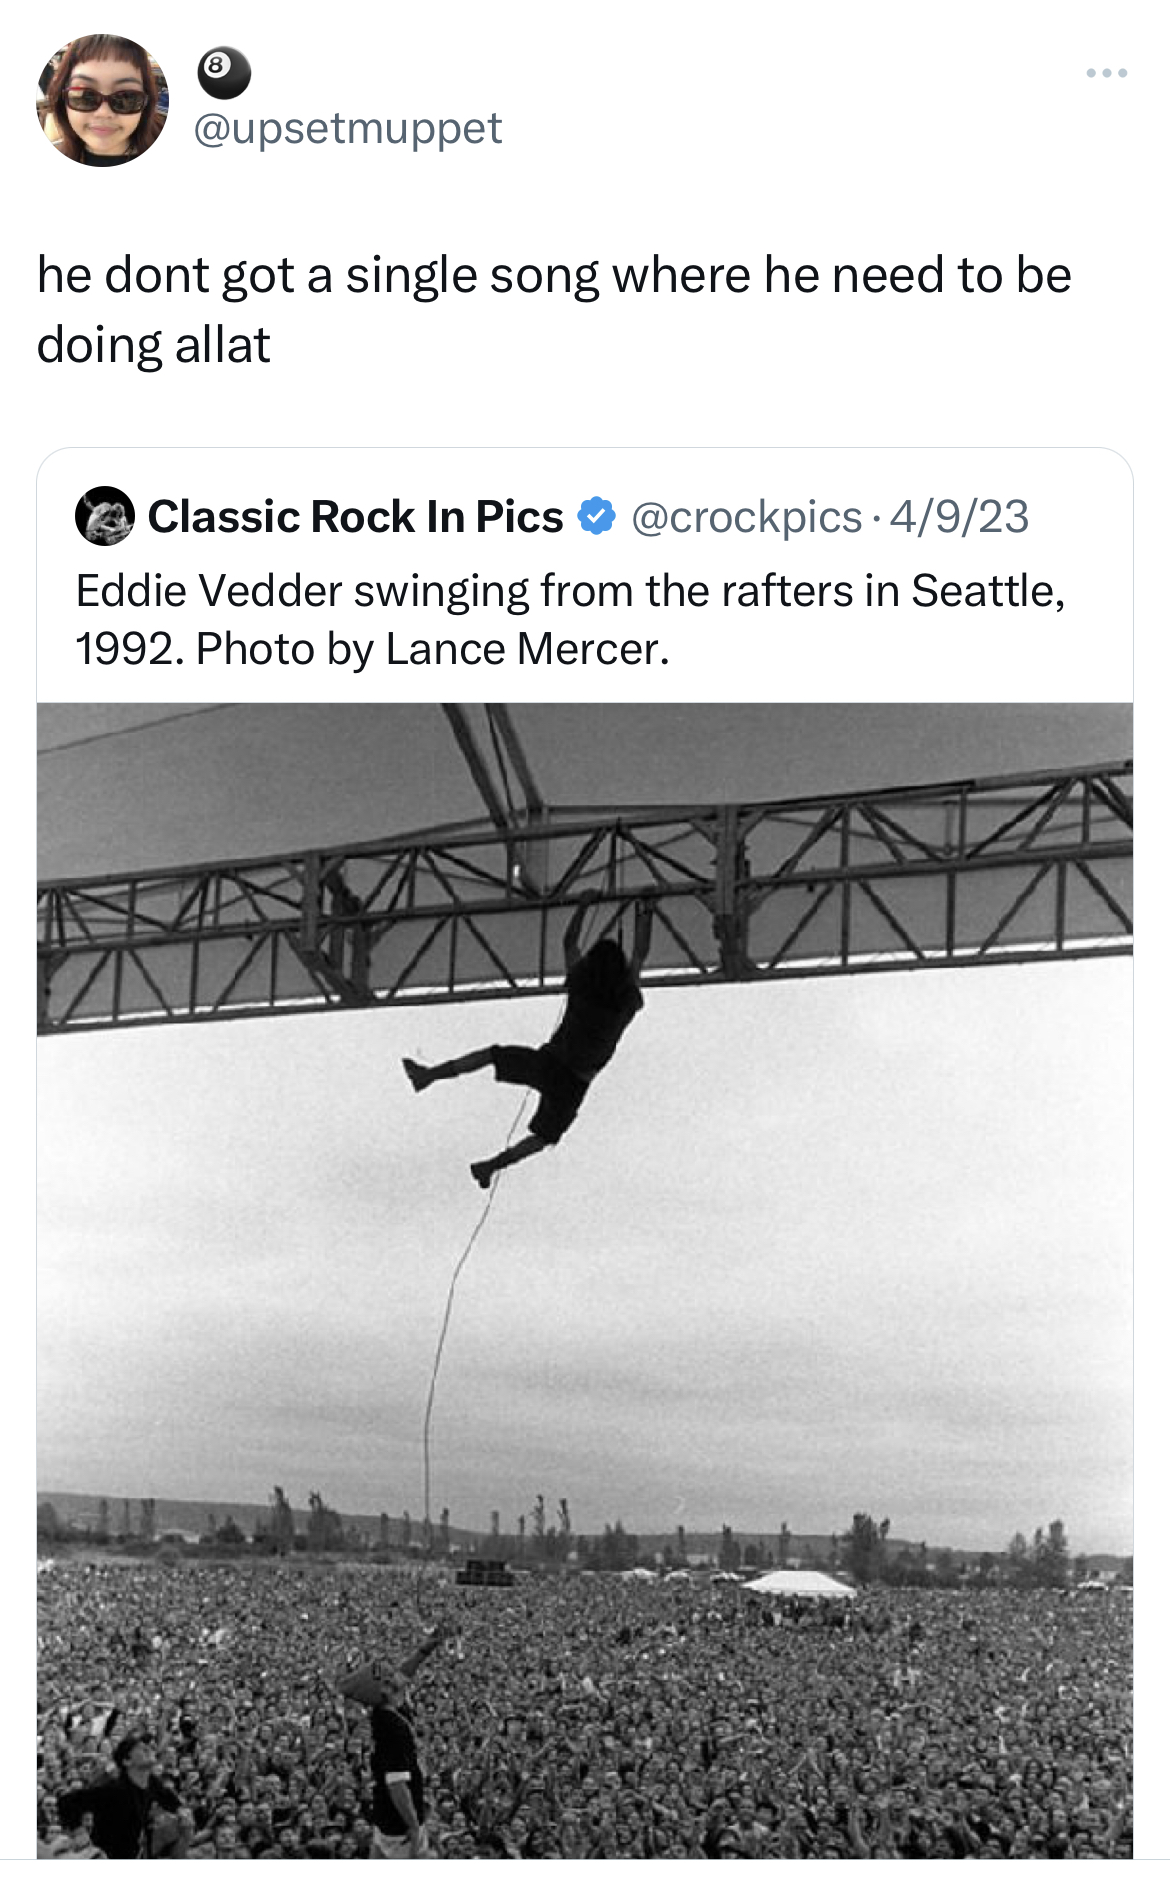 Don't have a single song where they need to do this - eddie vedder rafters - he dont got a single song where he need to be doing allat Classic Rock In Pics 4923 Eddie Vedder swinging from the rafters in Seattle, 1992. Photo by Lance Mercer.